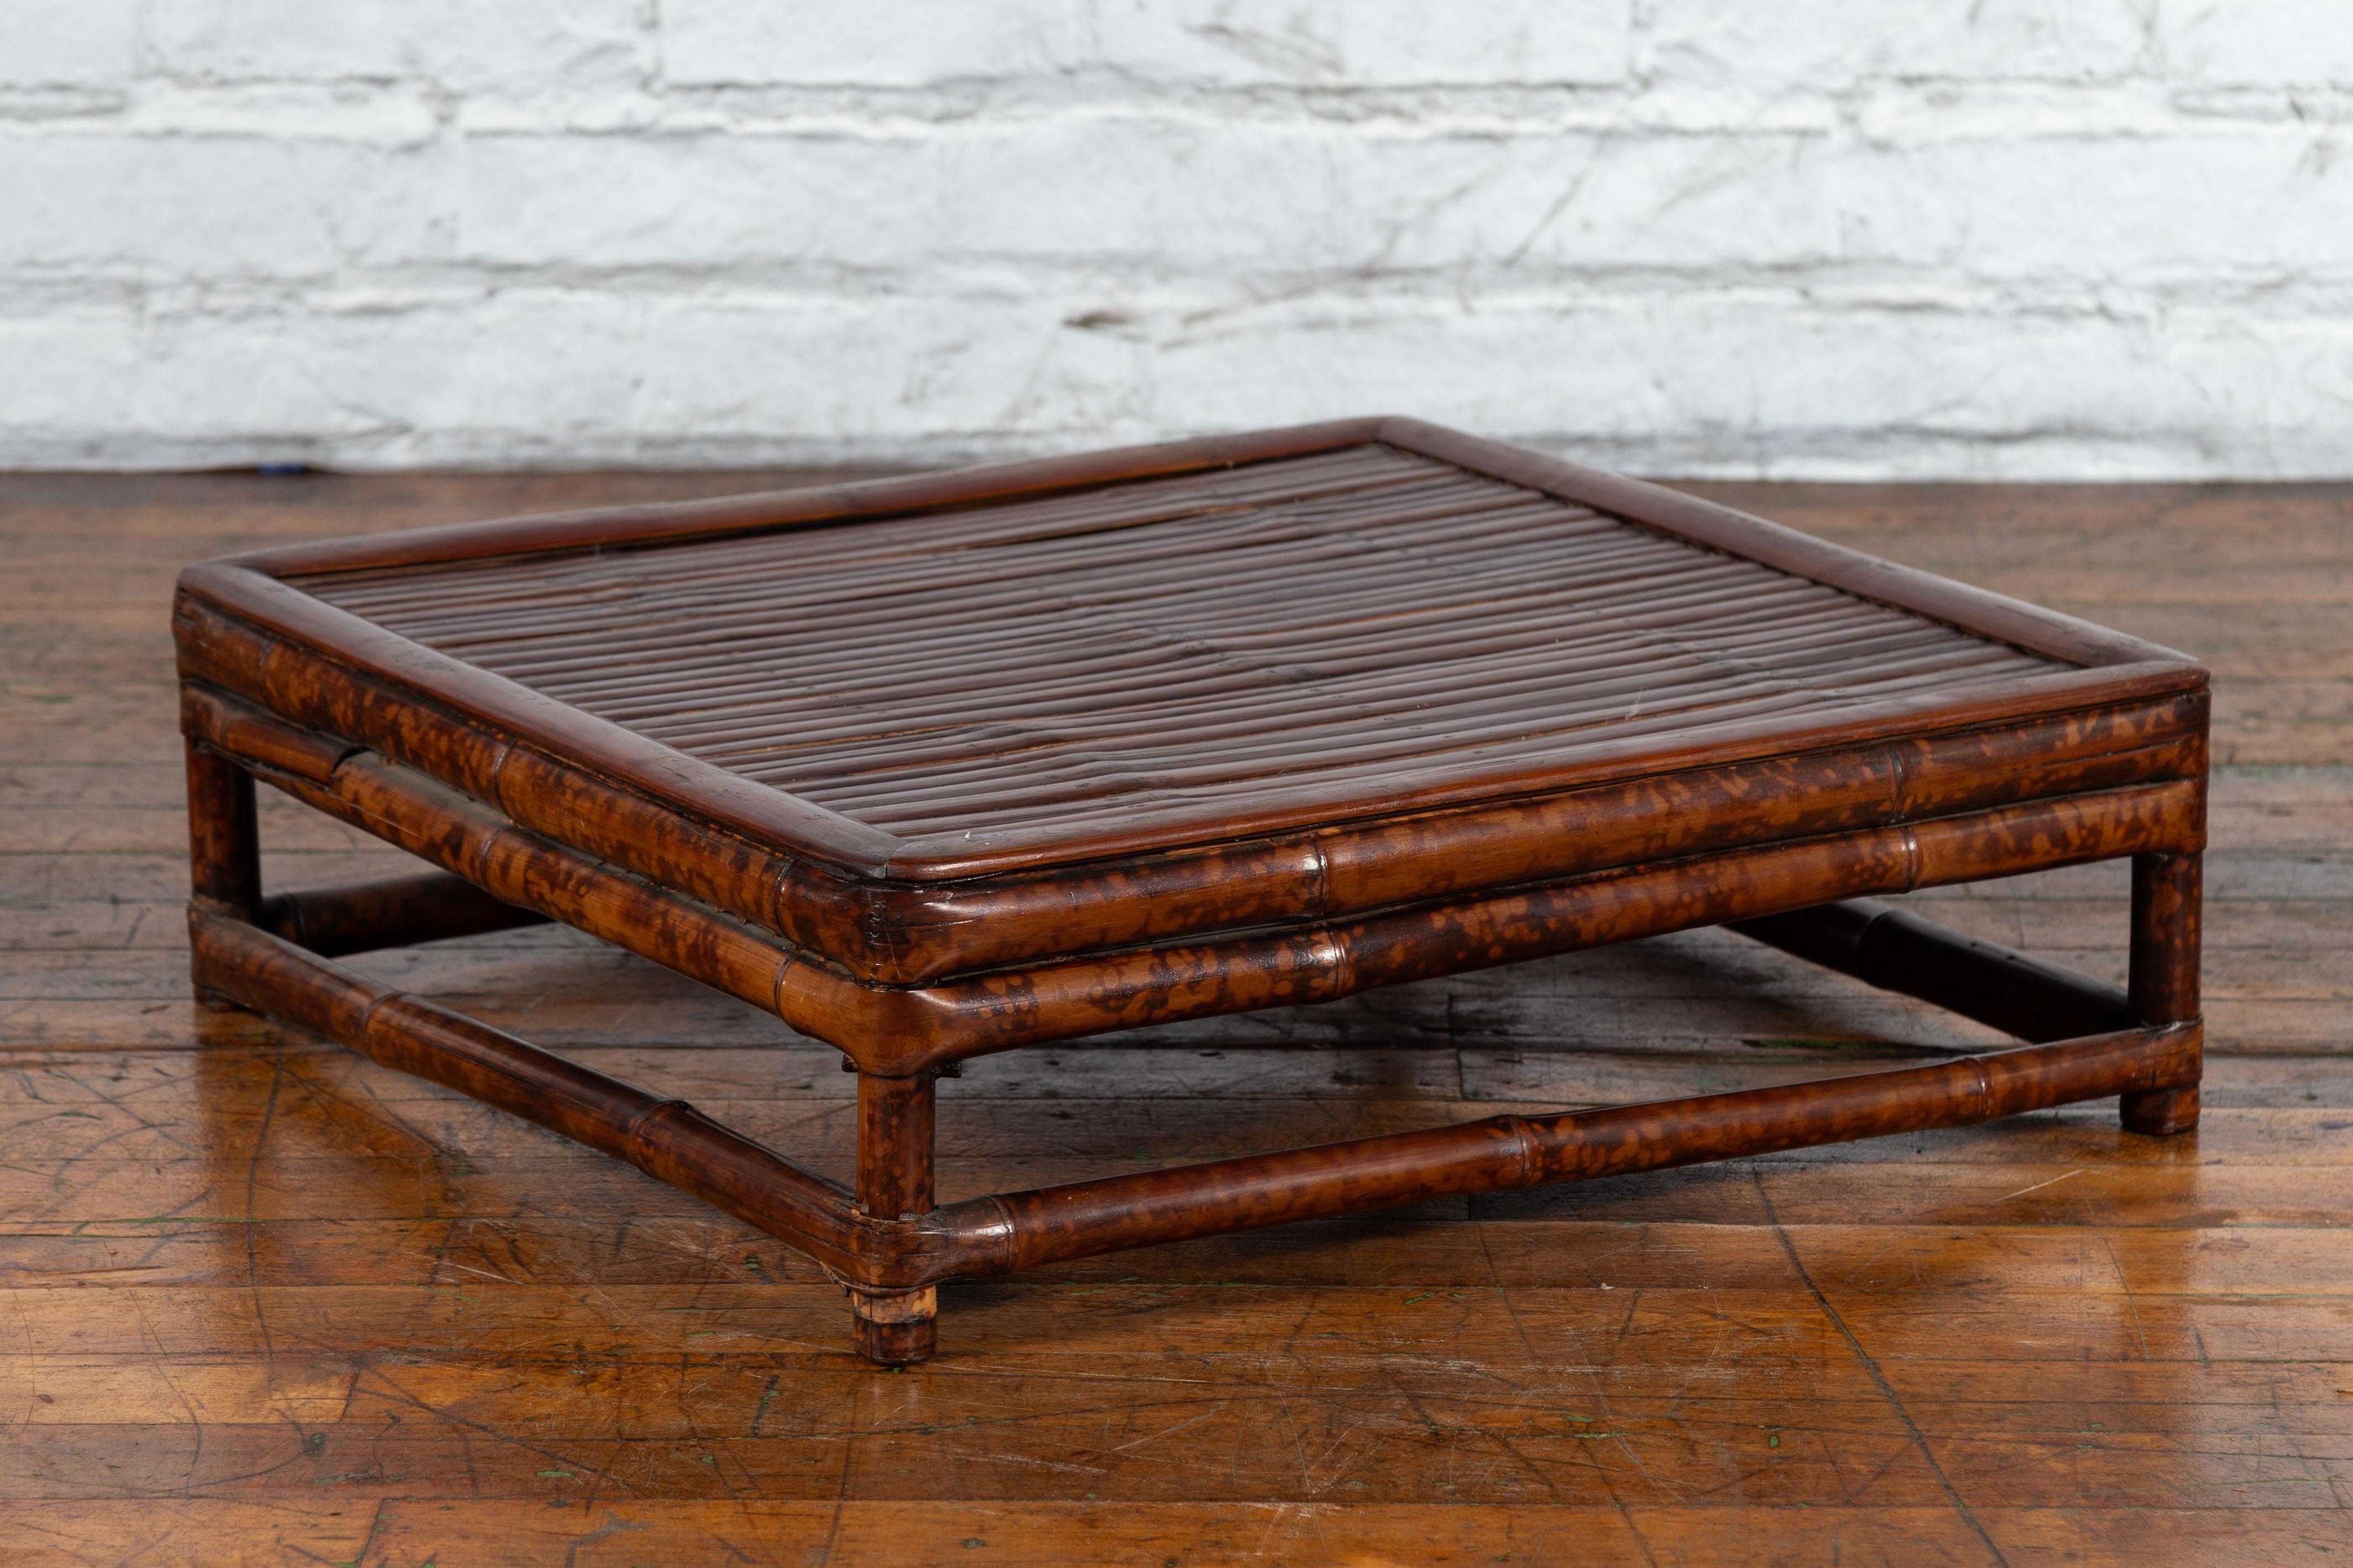 Chinese 19th Century Qing Dynasty Bamboo Low Coffee Table with Slatted Top For Sale 3